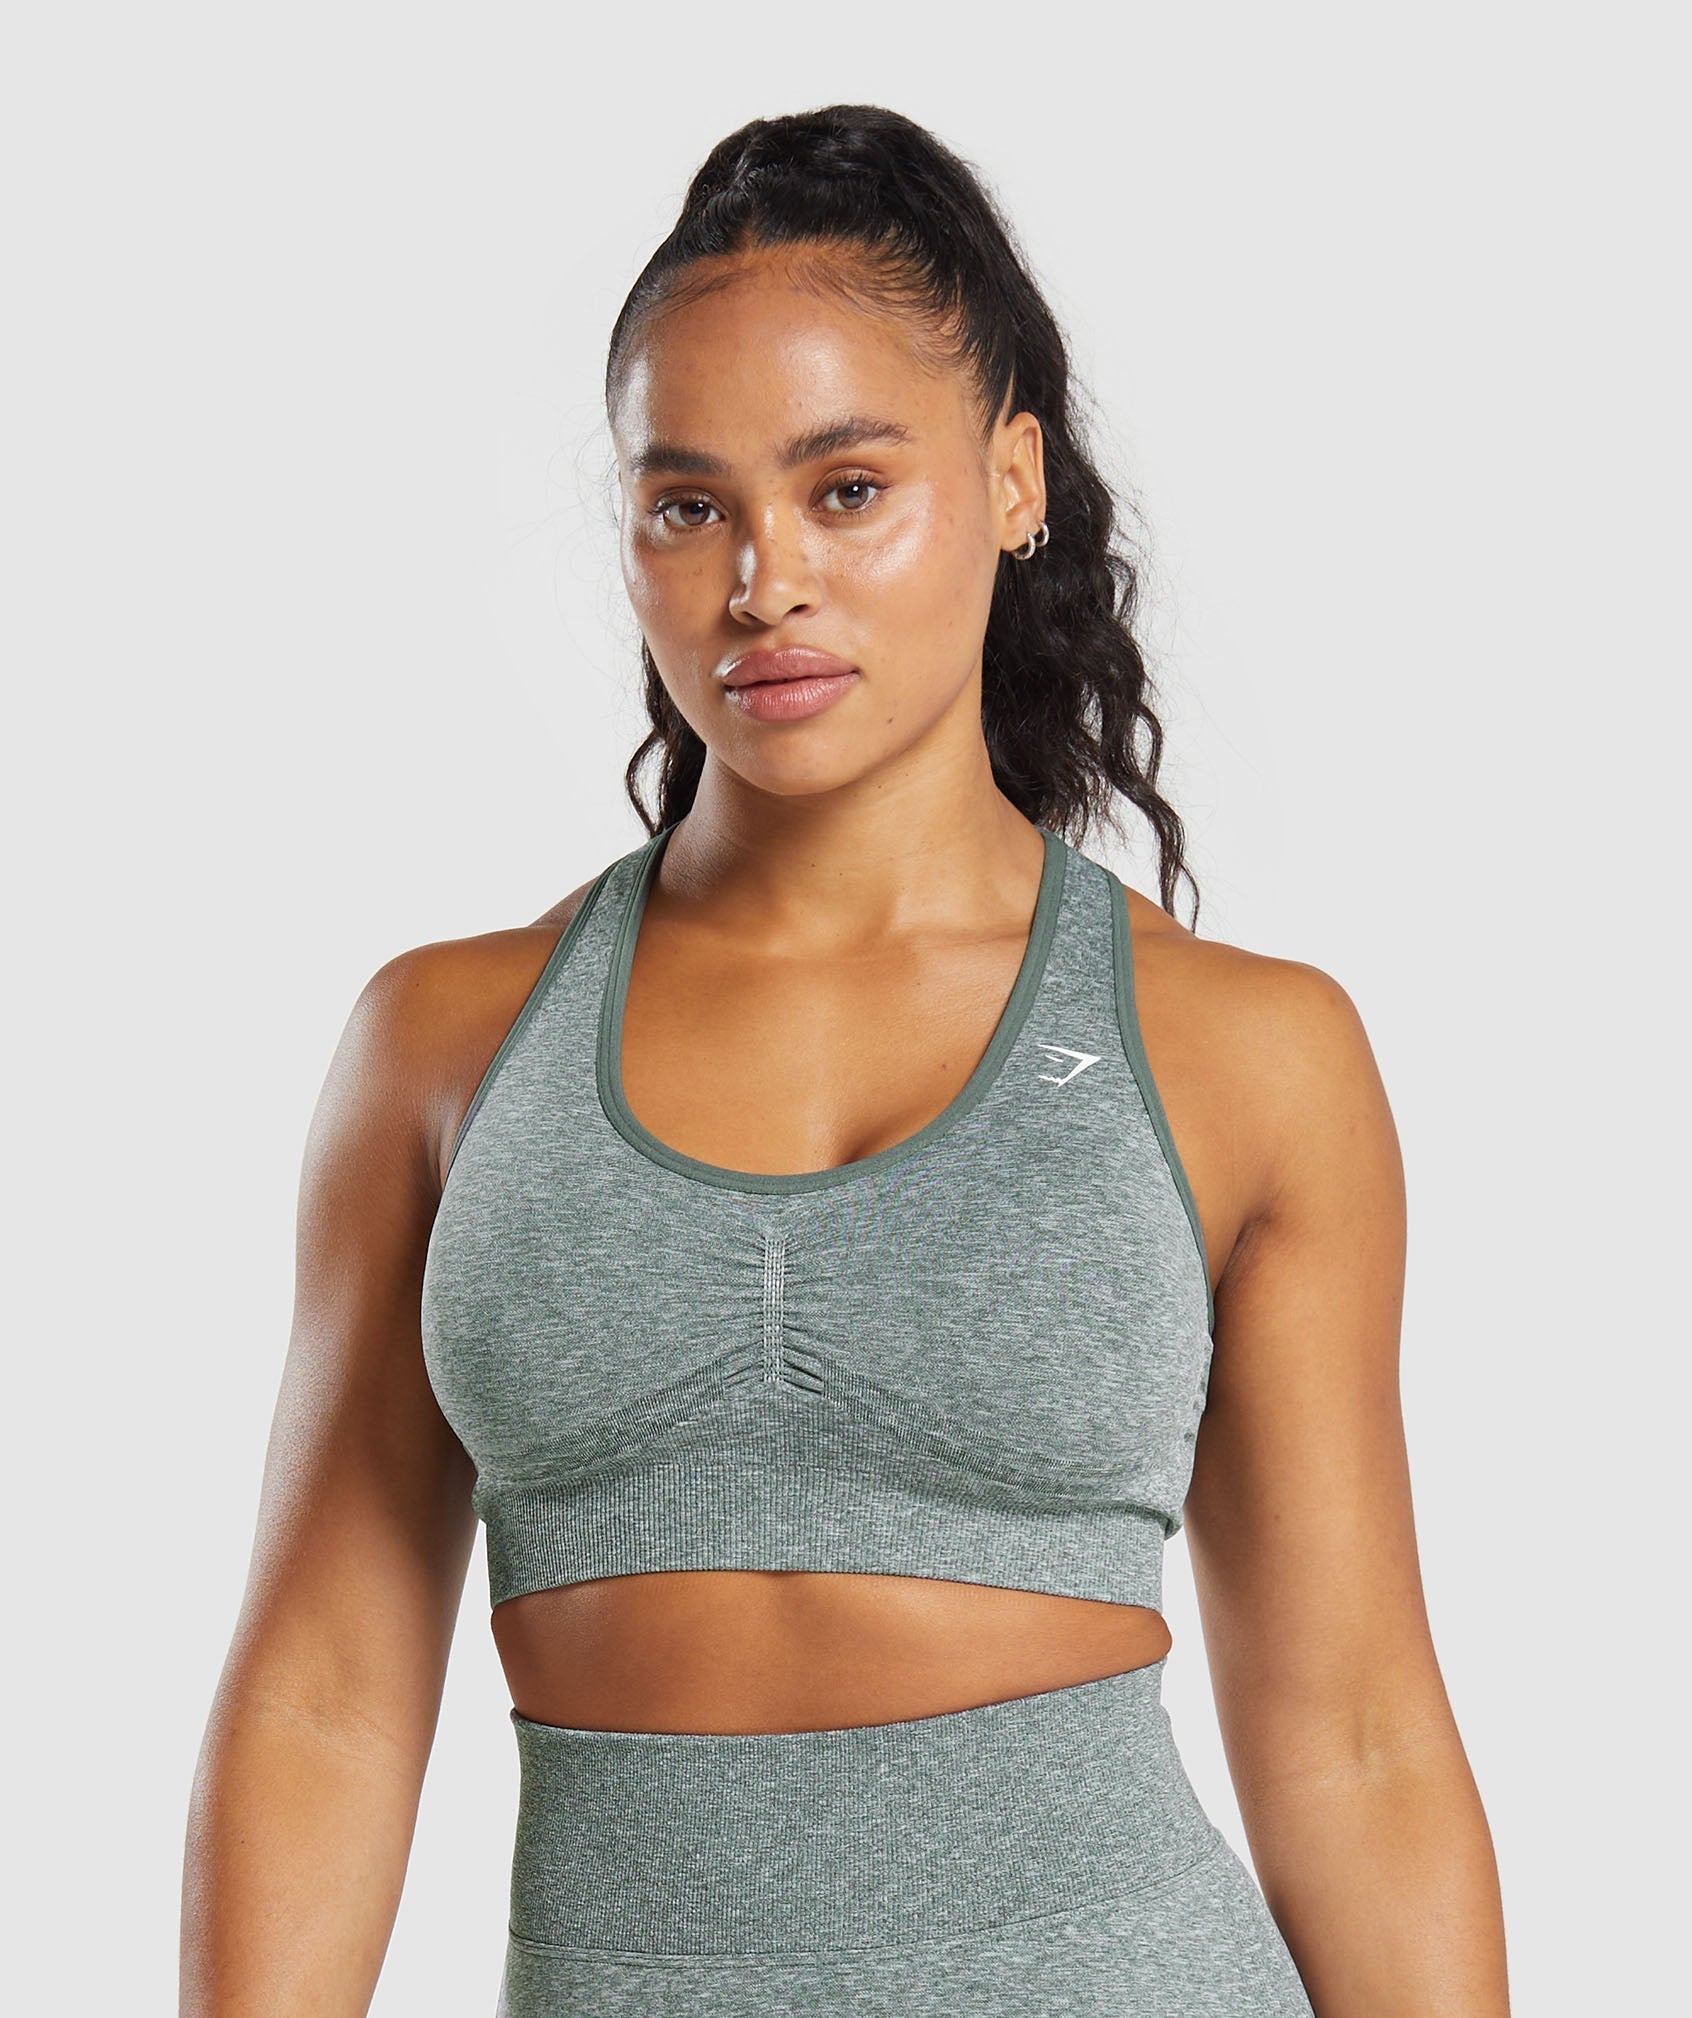 Lift Contour Seamless Sports Bra in Slate Teal/White Marl - view 1